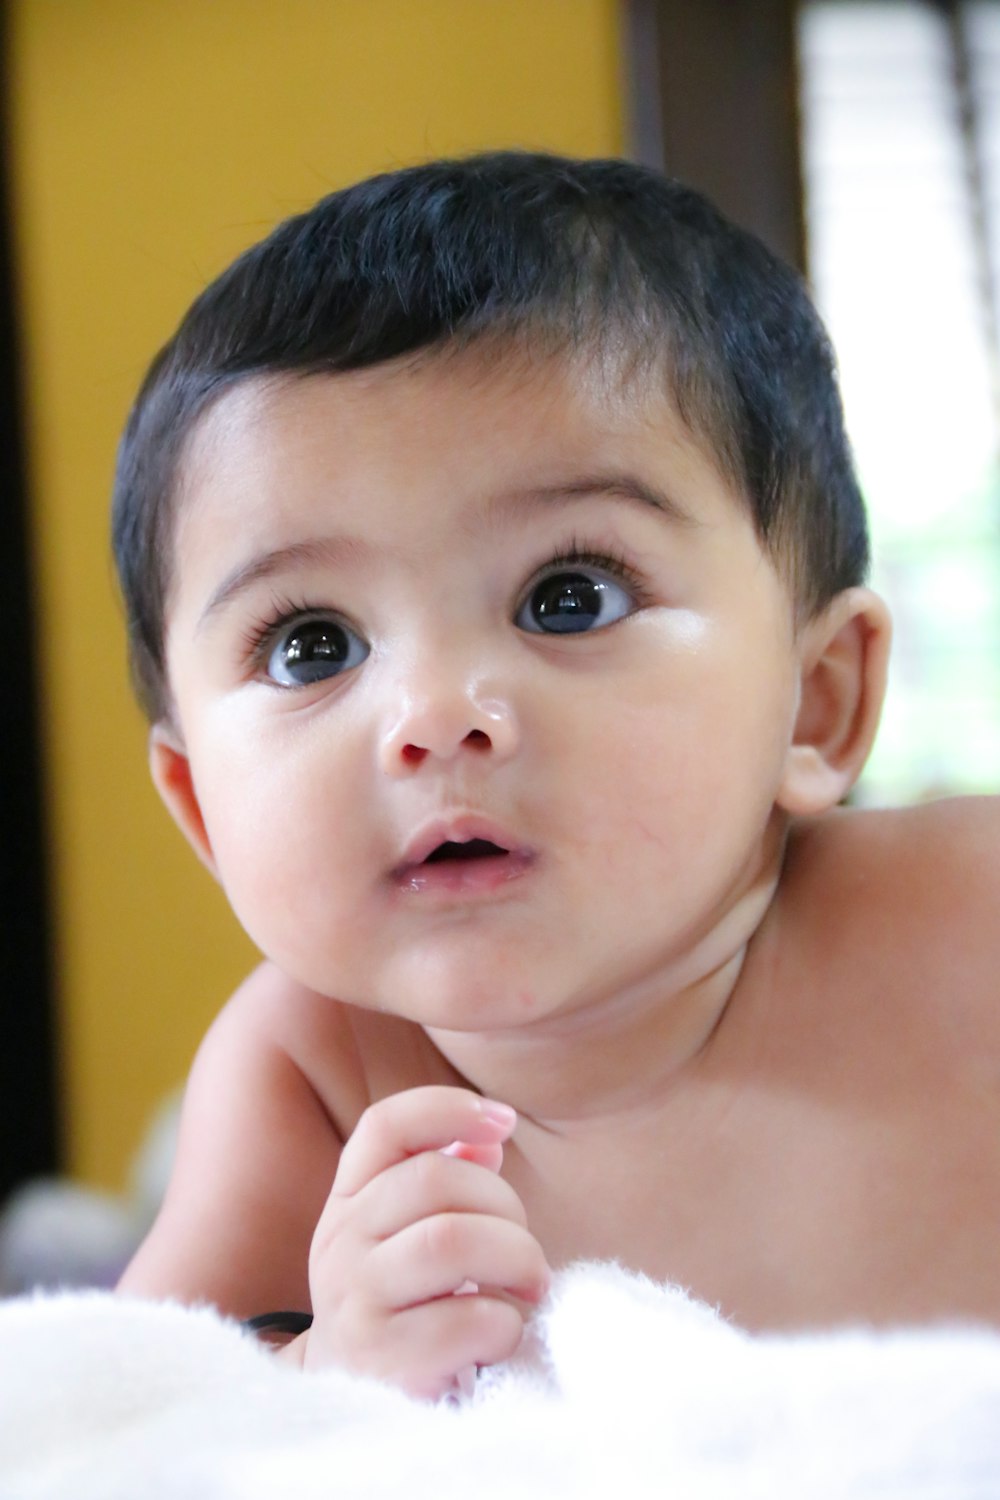 100+ Cute Baby Pictures [HD] | Download Free Images on Unsplash